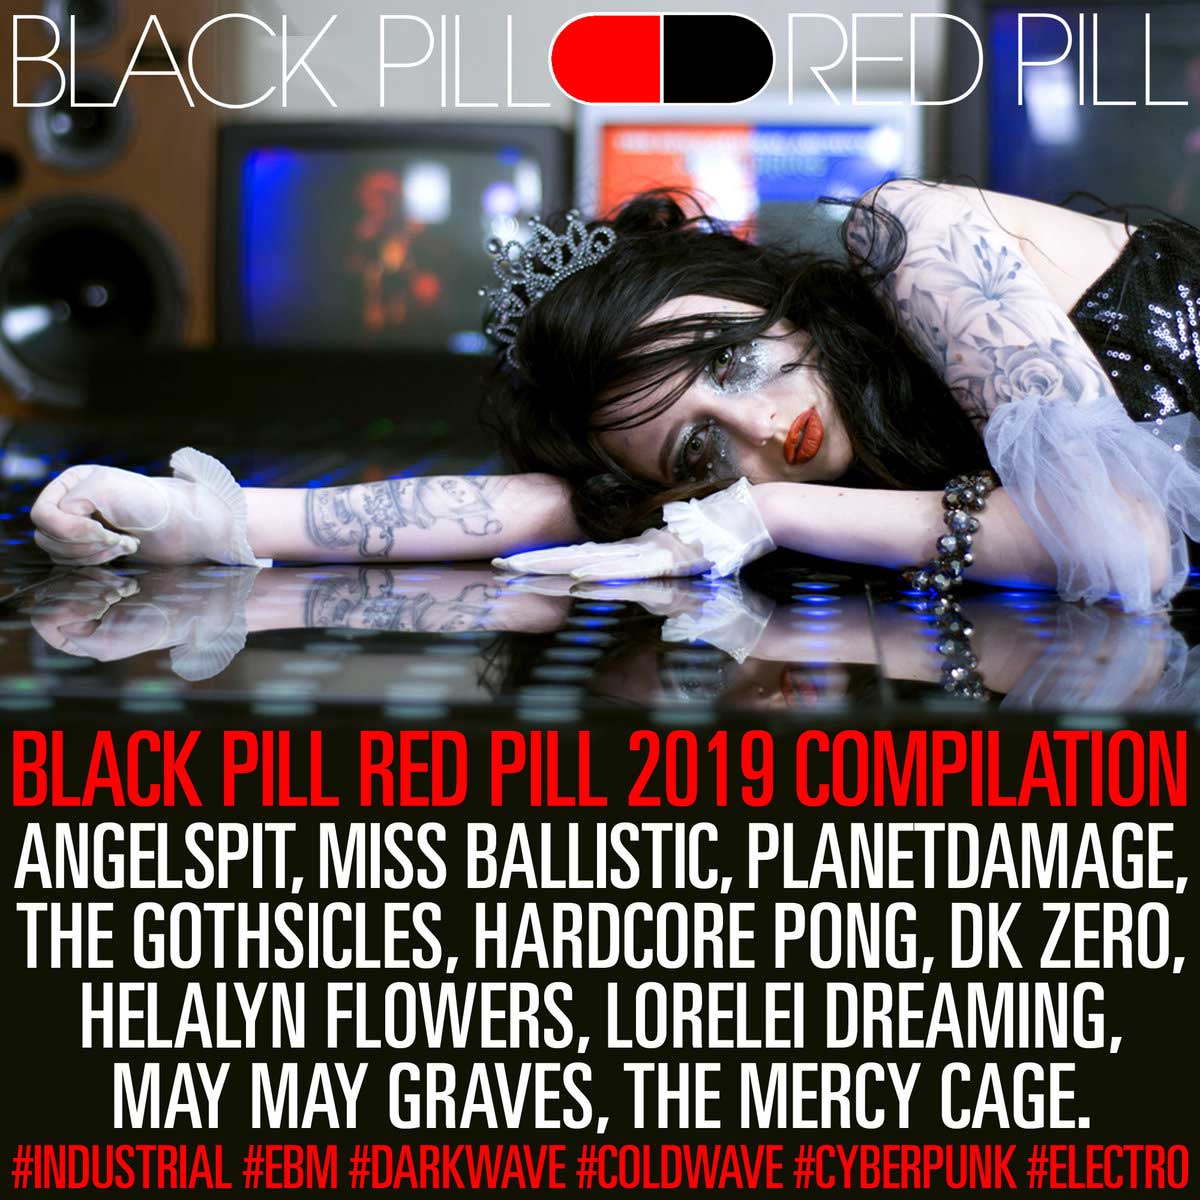 The Black Pill Red Pill 2019 Compilation is a free download from 10 awesome...